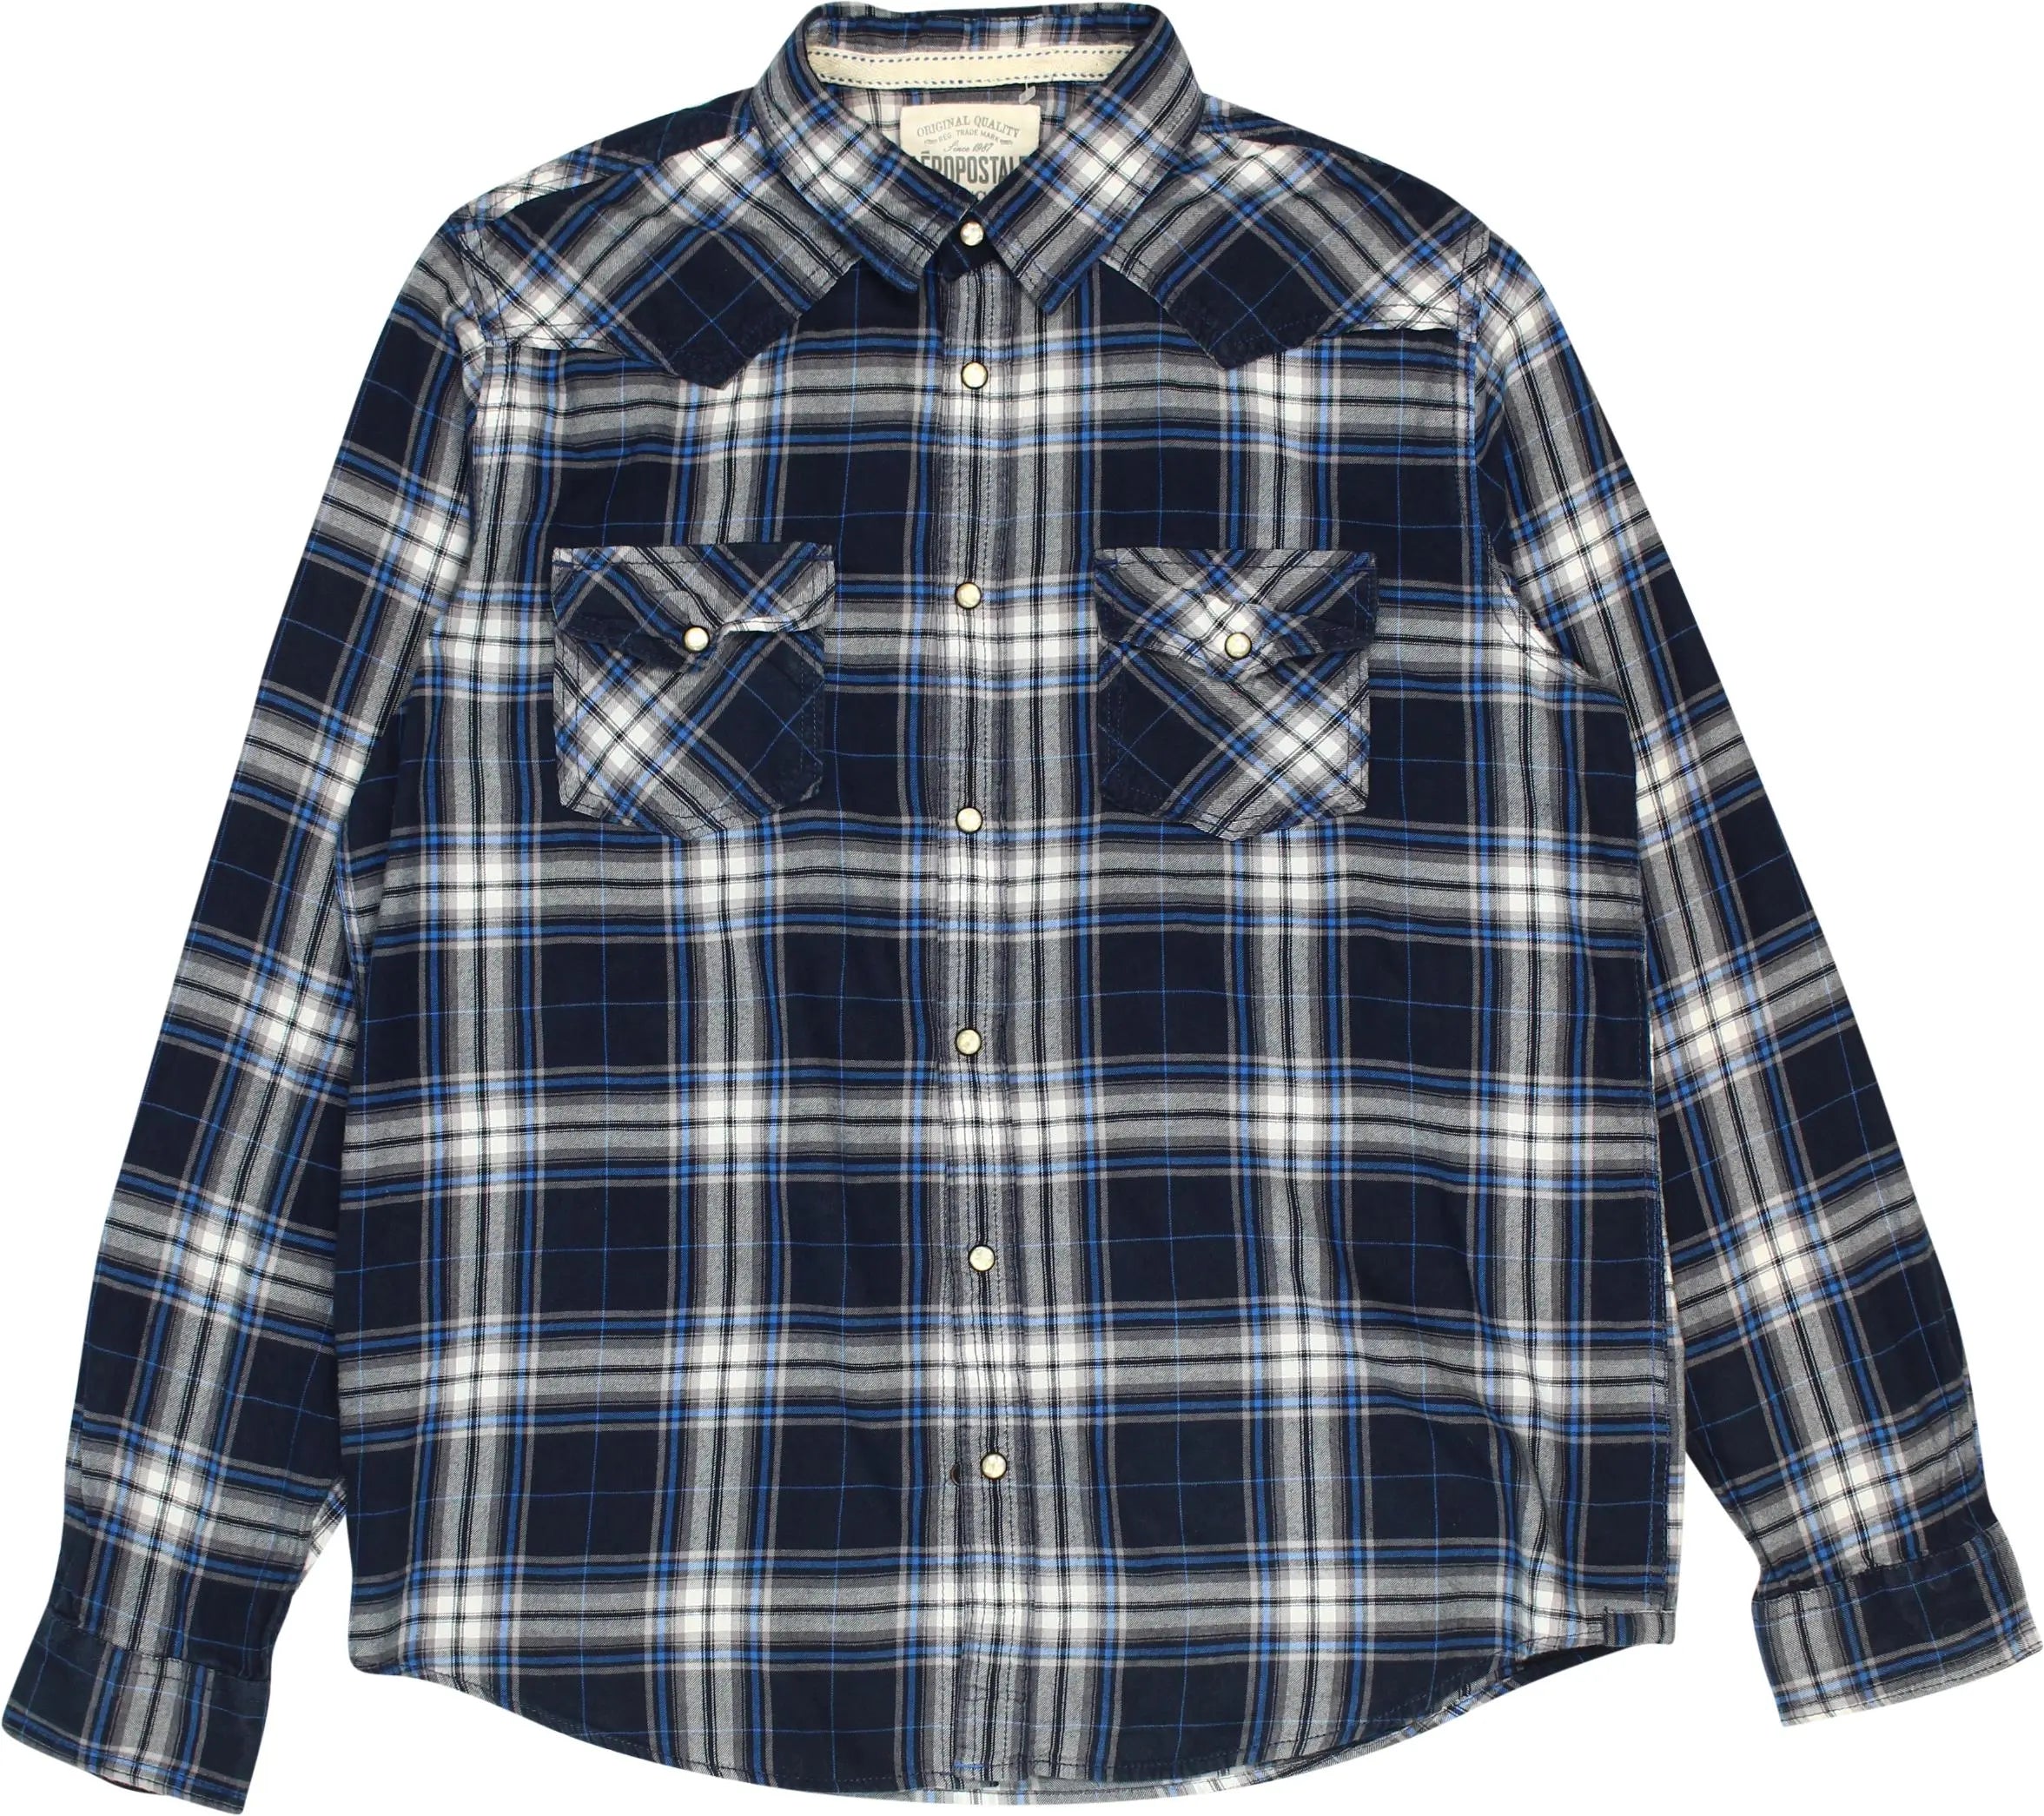 Aeropstale - Checked Shirt- ThriftTale.com - Vintage and second handclothing